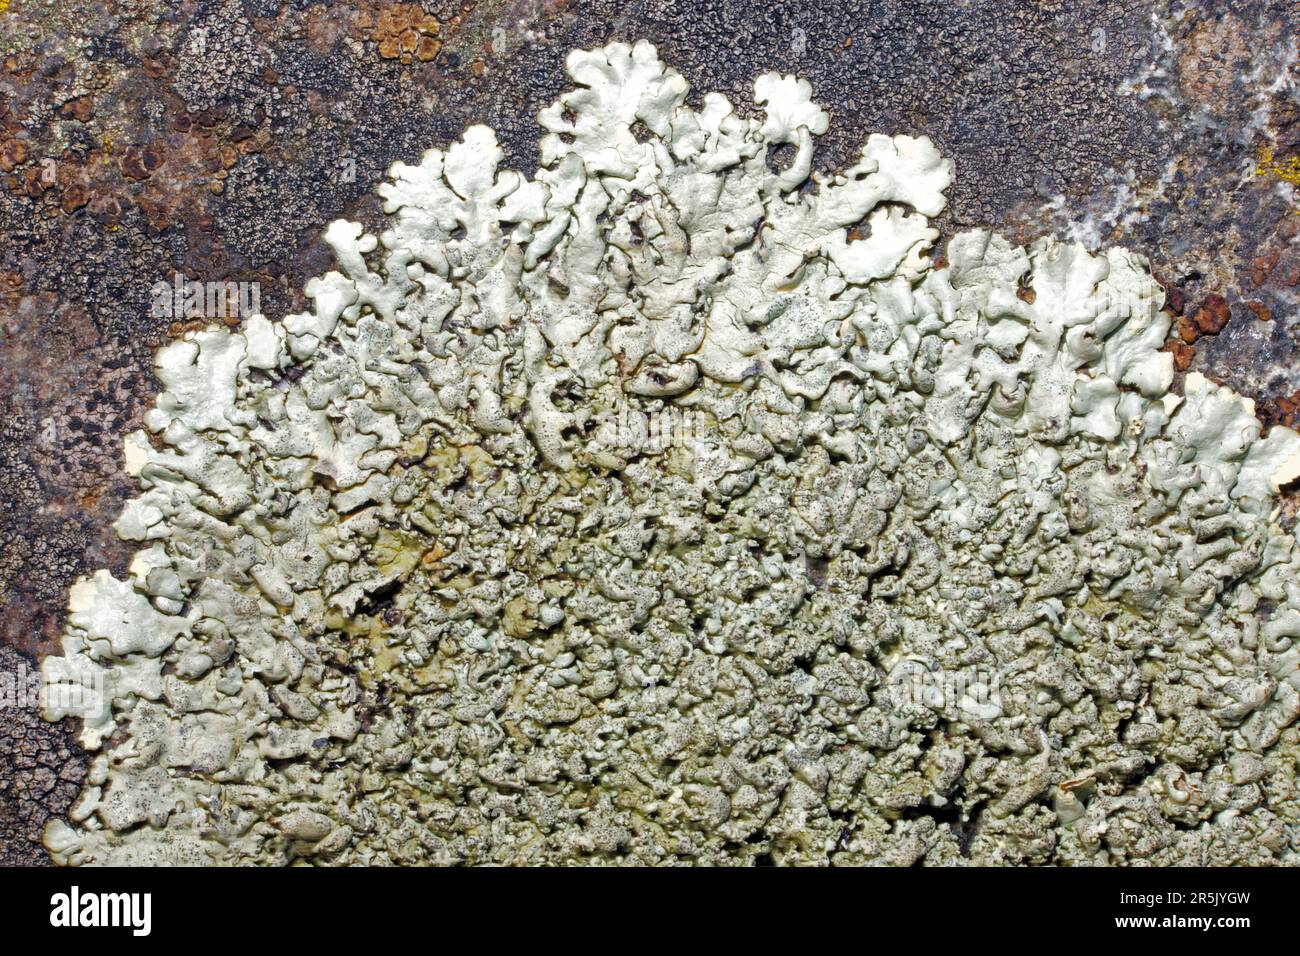 Xanthoparmelia stenophylla is a foliose lichen found on well-lit rocks especially near the sea. It has a cosmopolitan distribution. Stock Photo